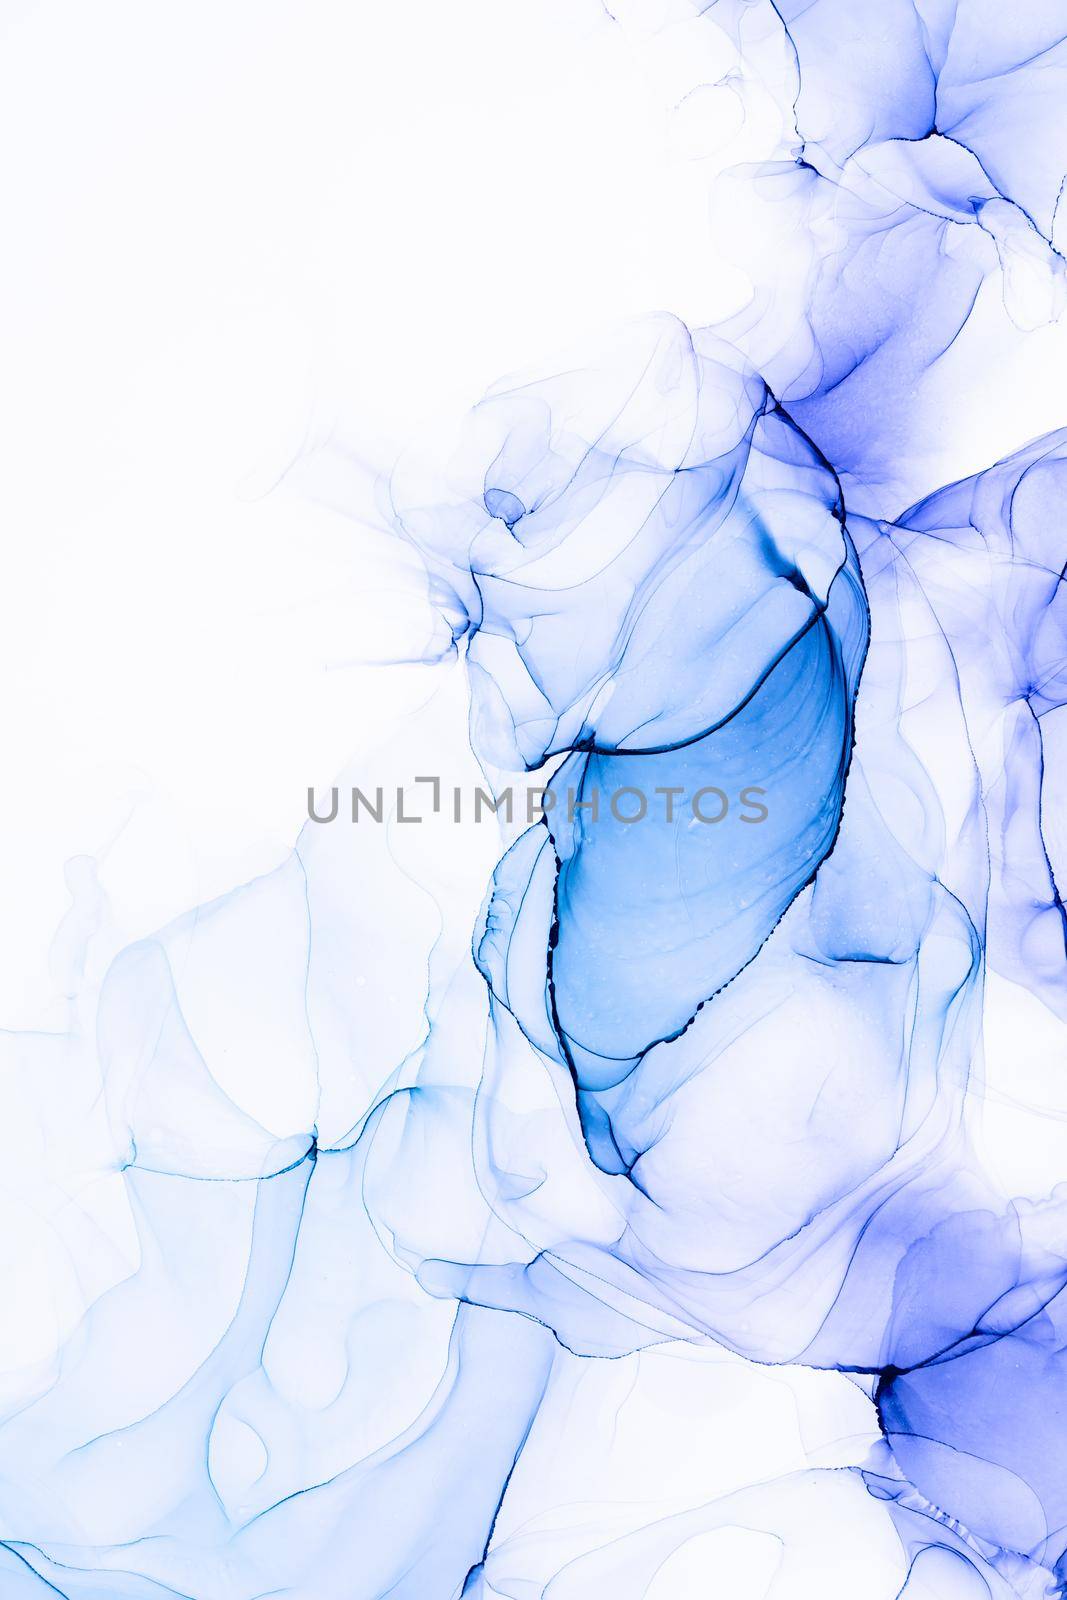 Marble ink abstract art from exquisite original painting for abstract background . Painting was painted on high quality paper texture to create smooth marble background pattern of ombre alcohol ink .